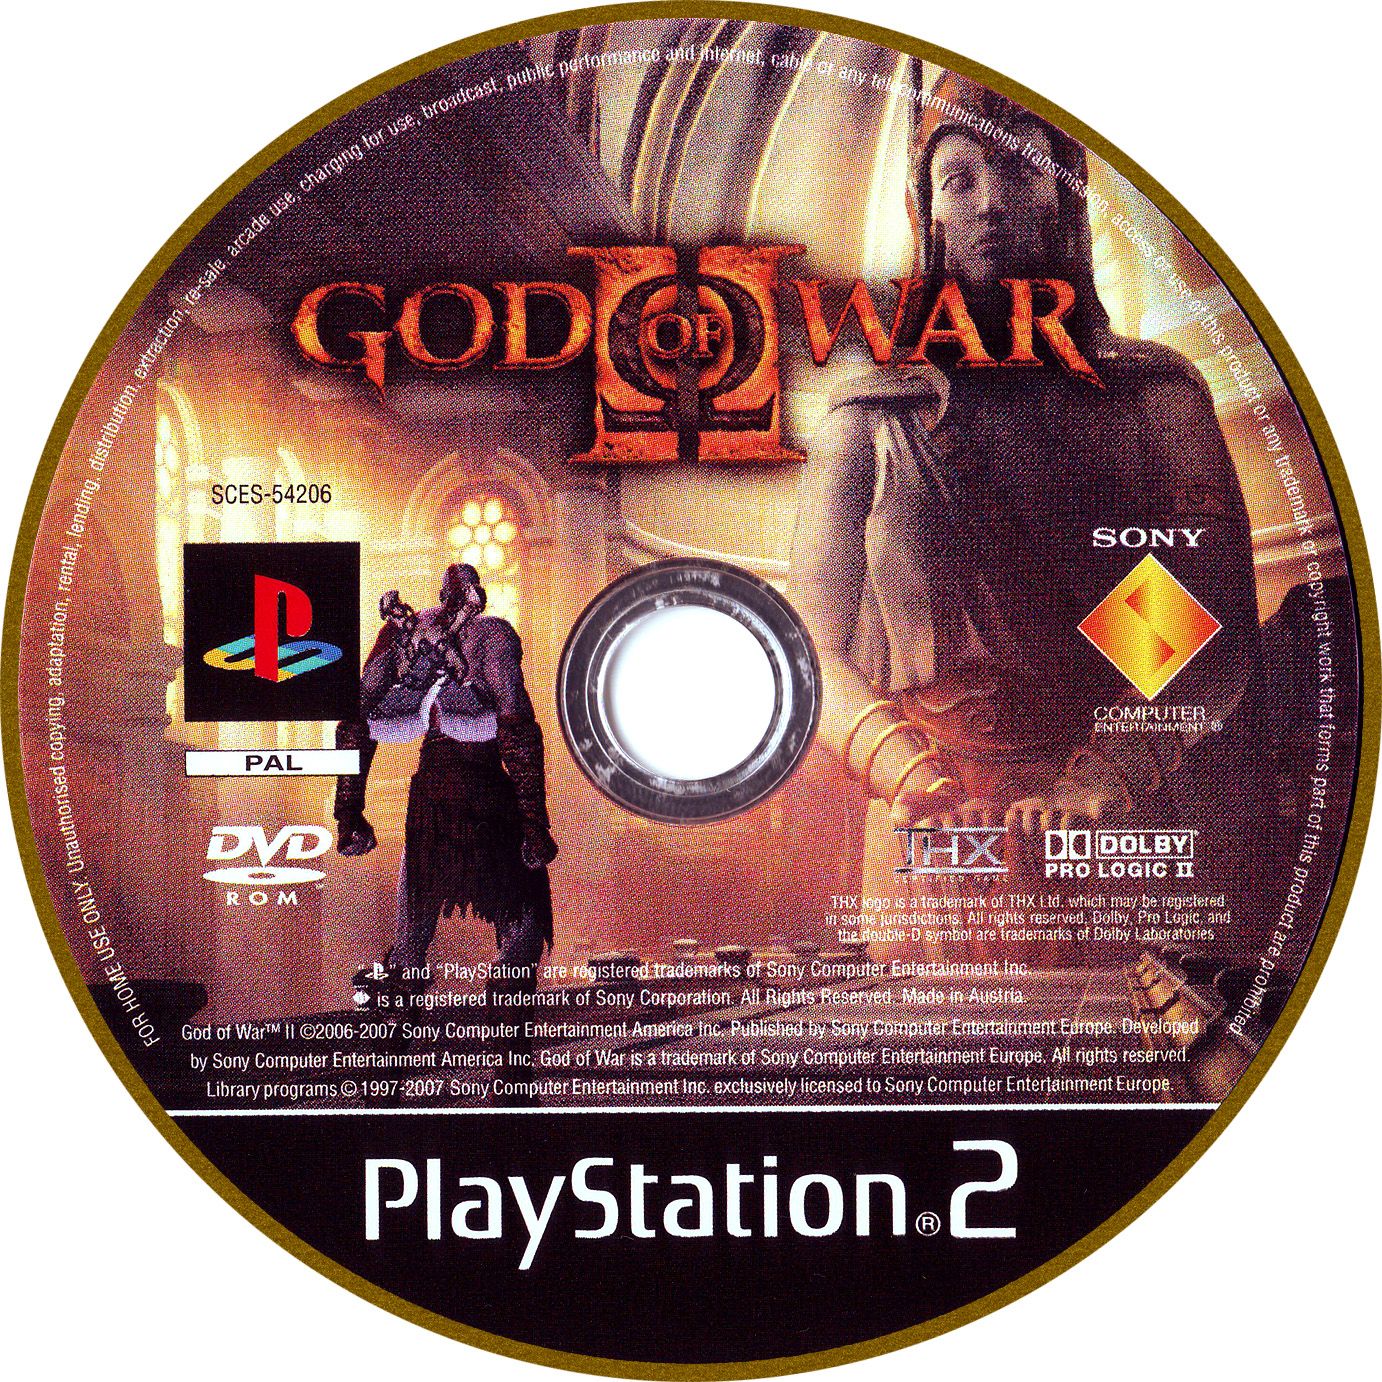 god of war 3 ps2 download iso